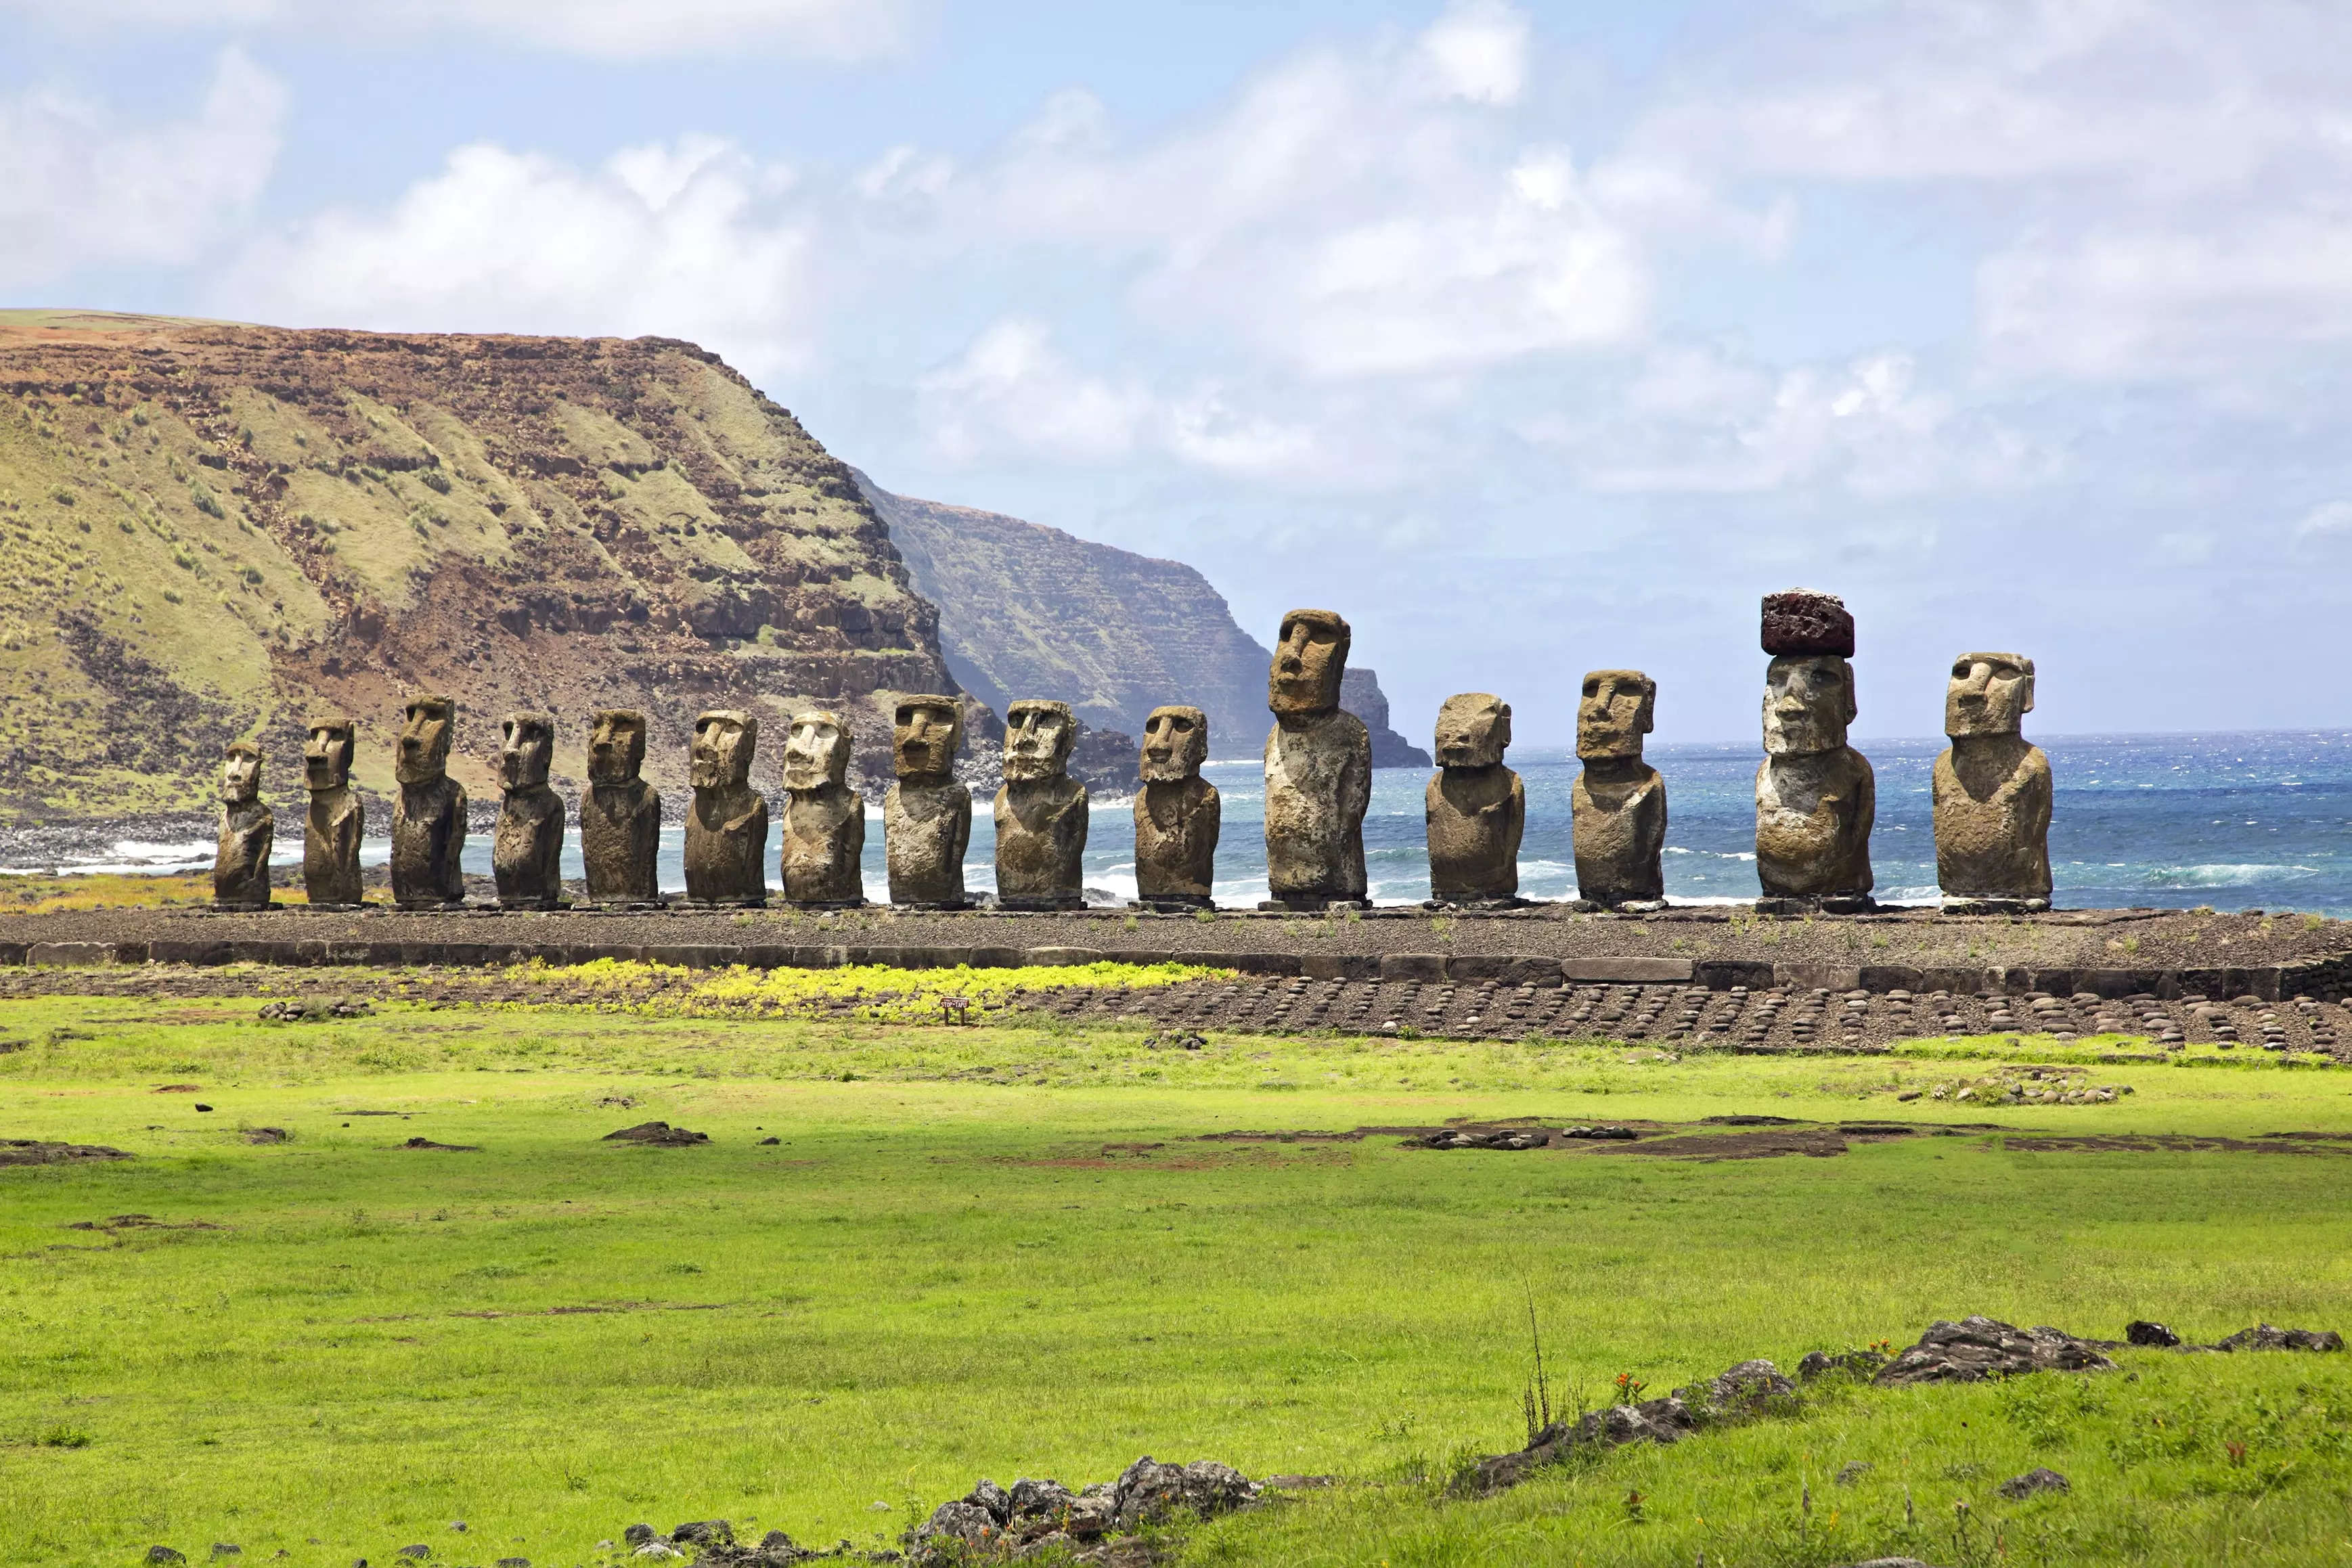 Chile’s Easter Island opens its doors for tourists after pandemic shutdown